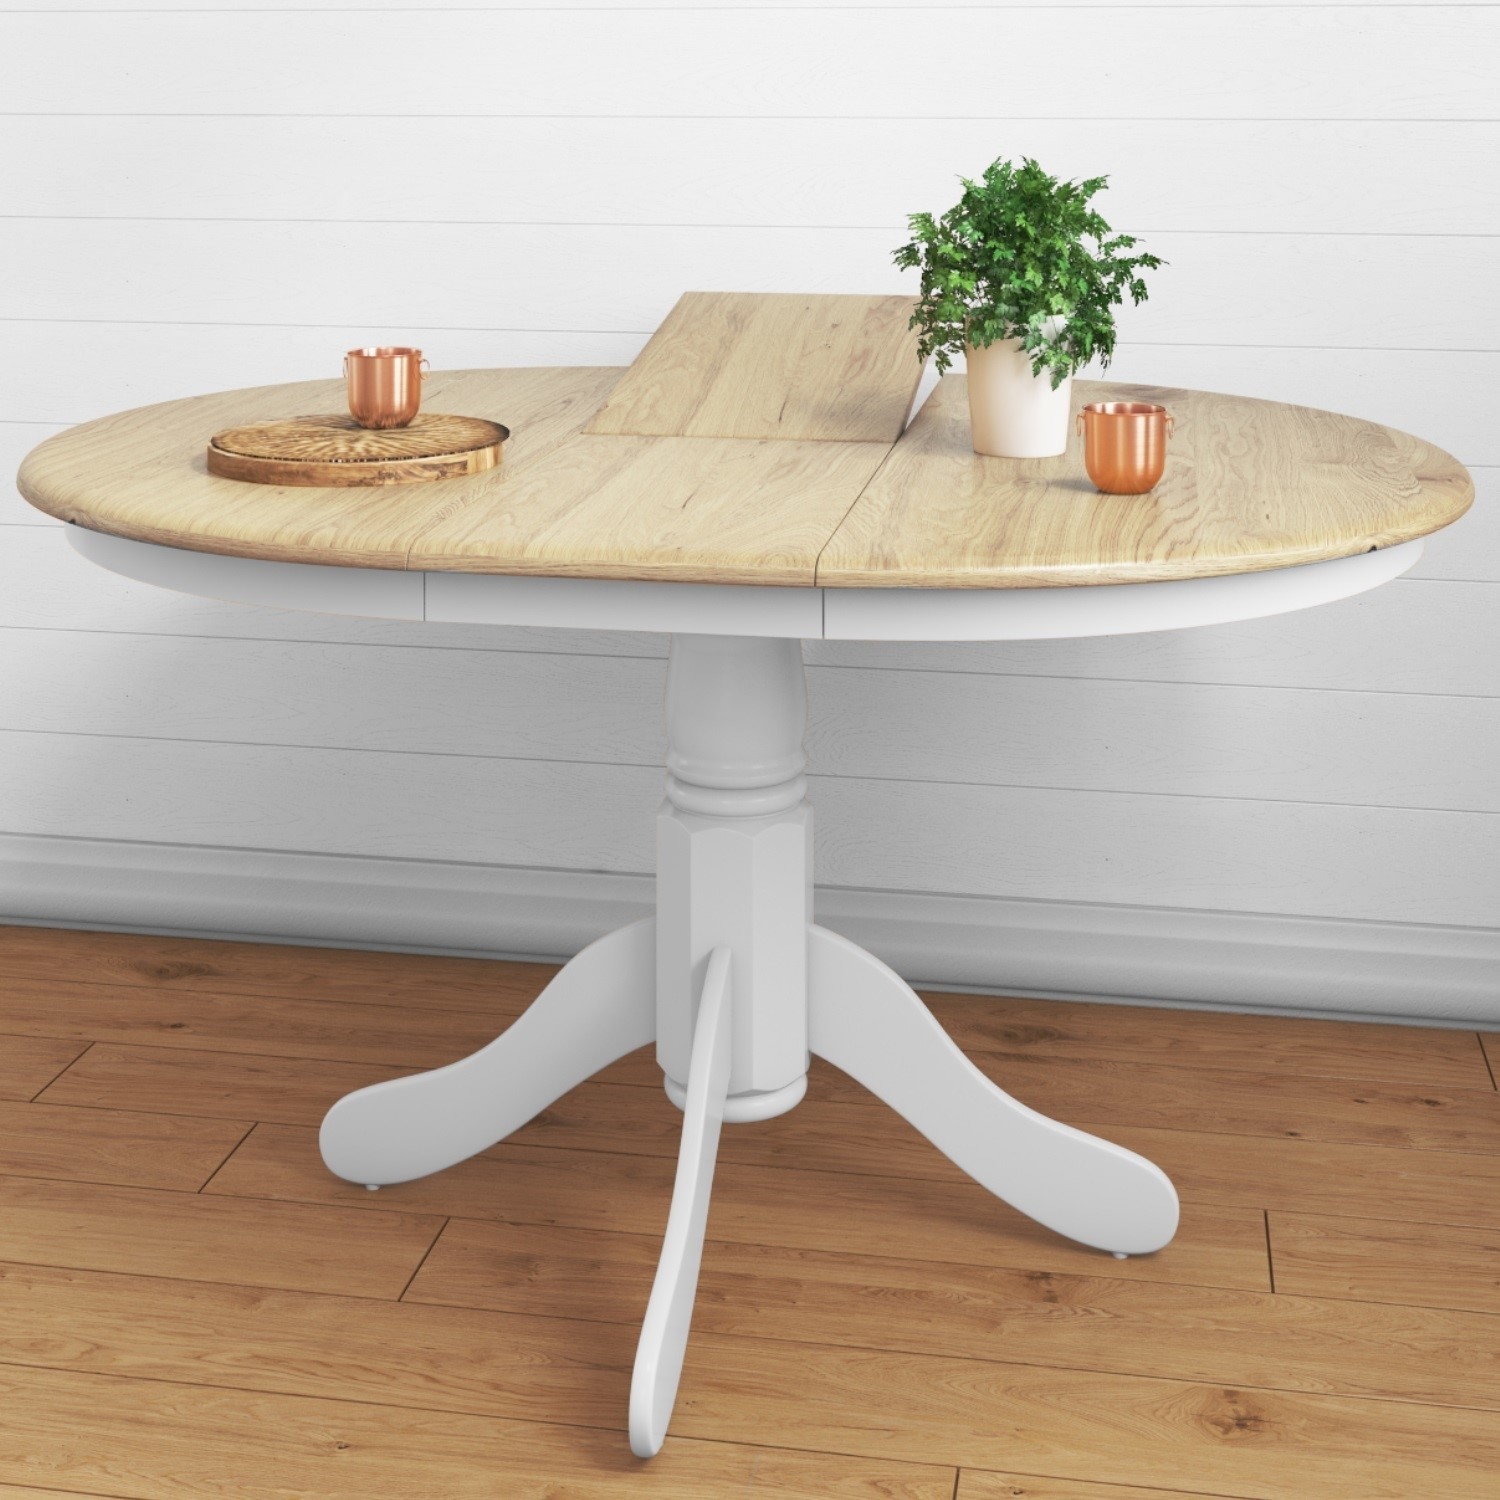 Extendable Round Wooden Dining Table In White/Natural 6 Seater